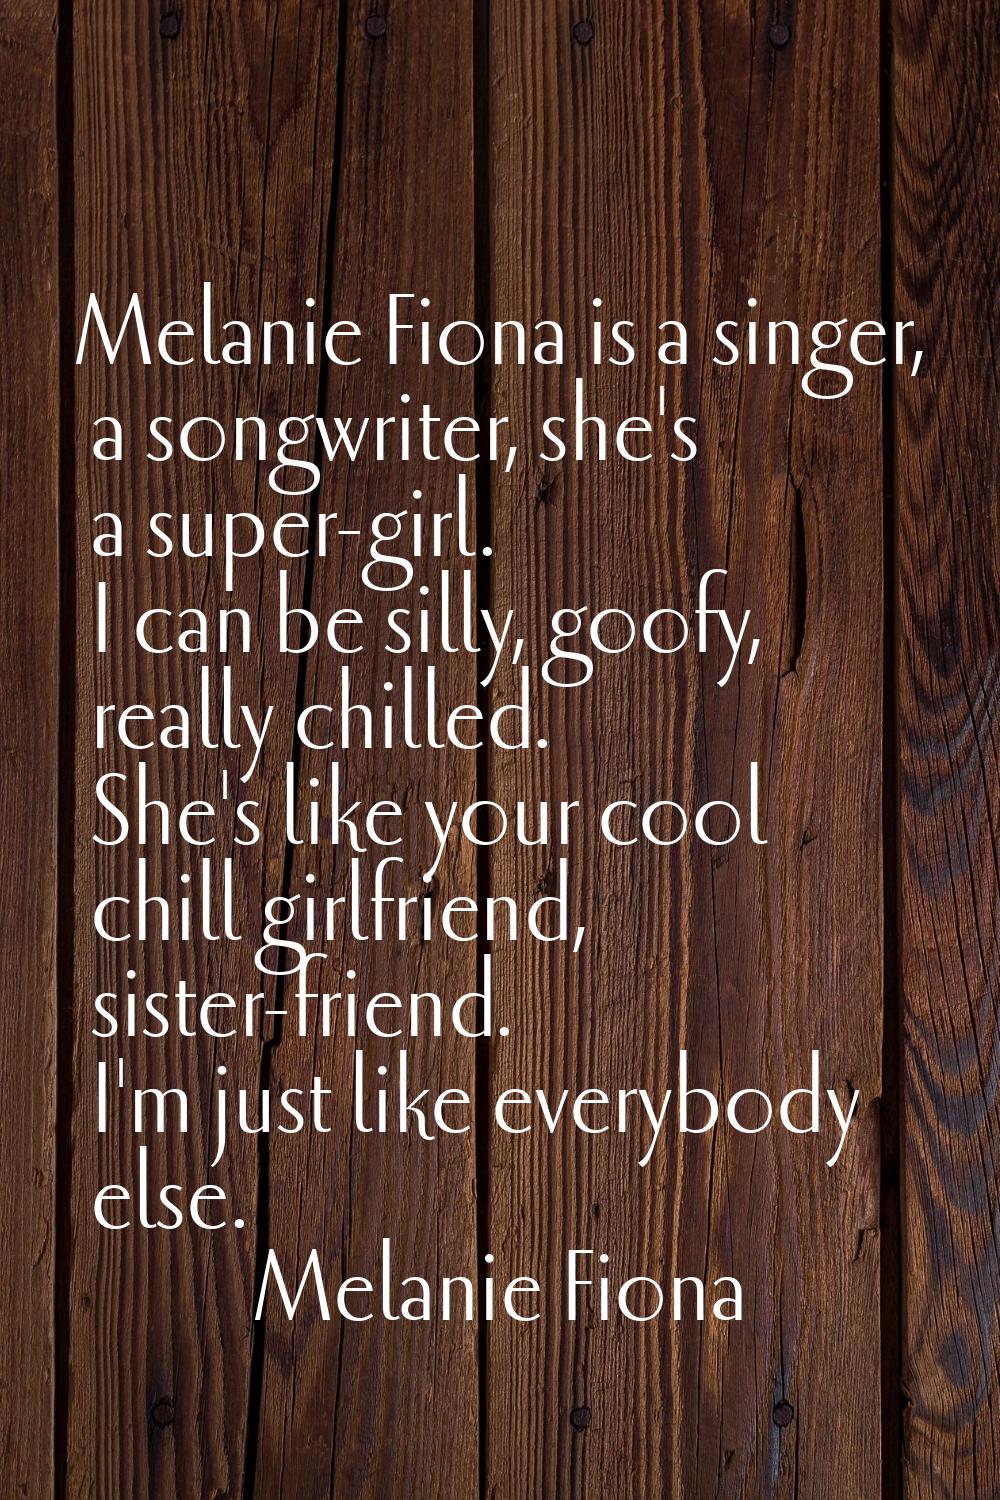 Melanie Fiona is a singer, a songwriter, she's a super-girl. I can be silly, goofy, really chilled.